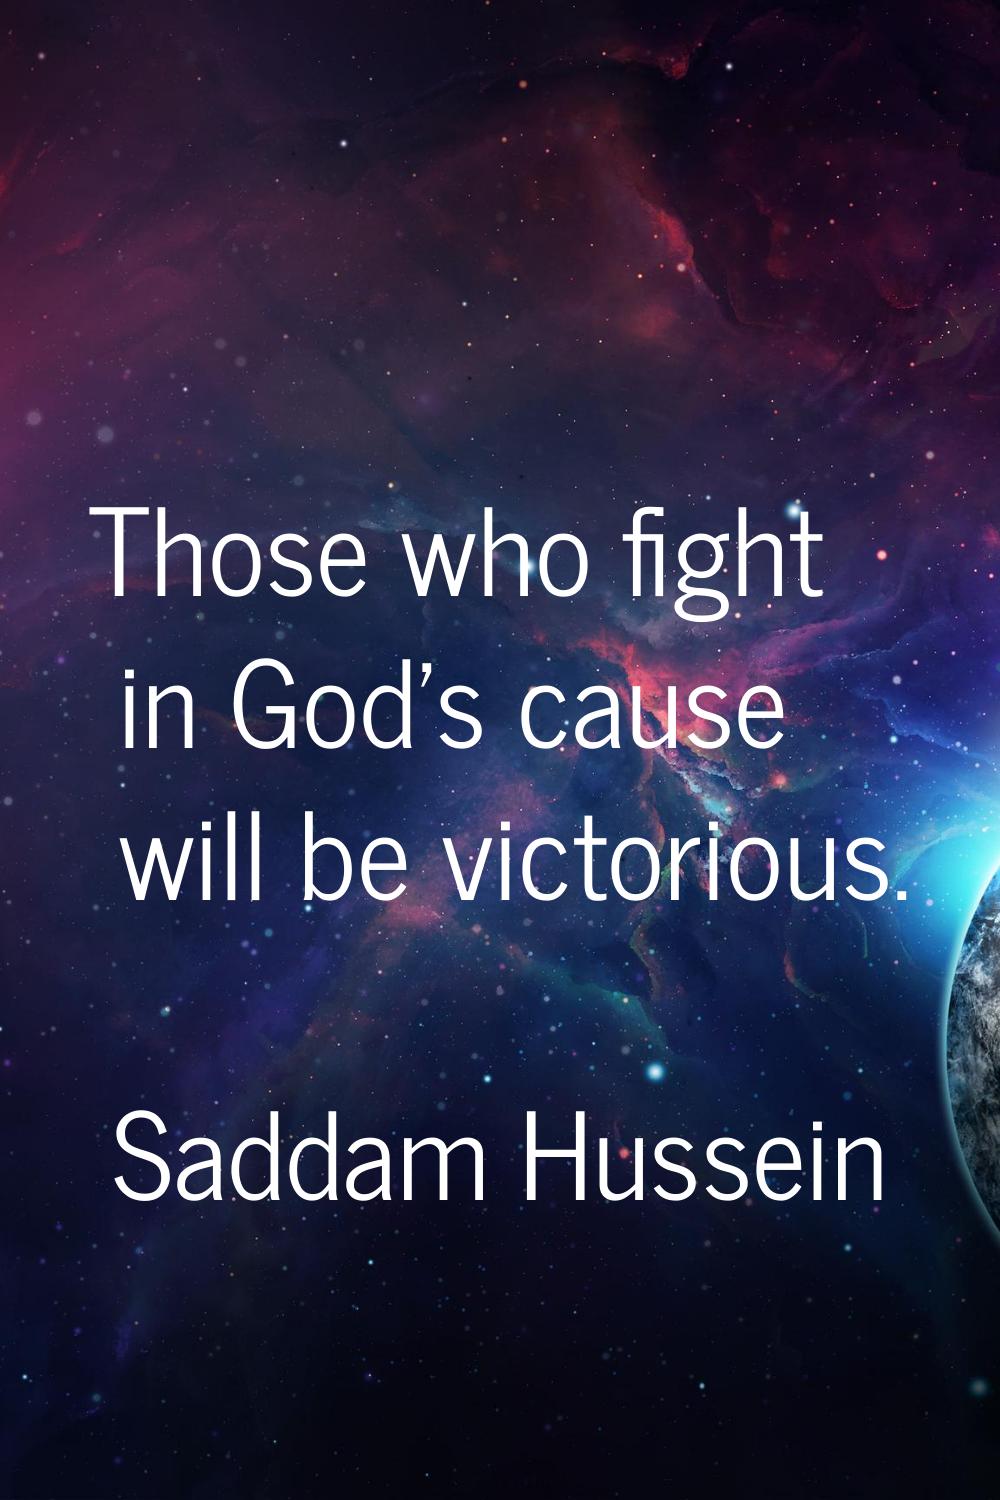 Those who fight in God's cause will be victorious.